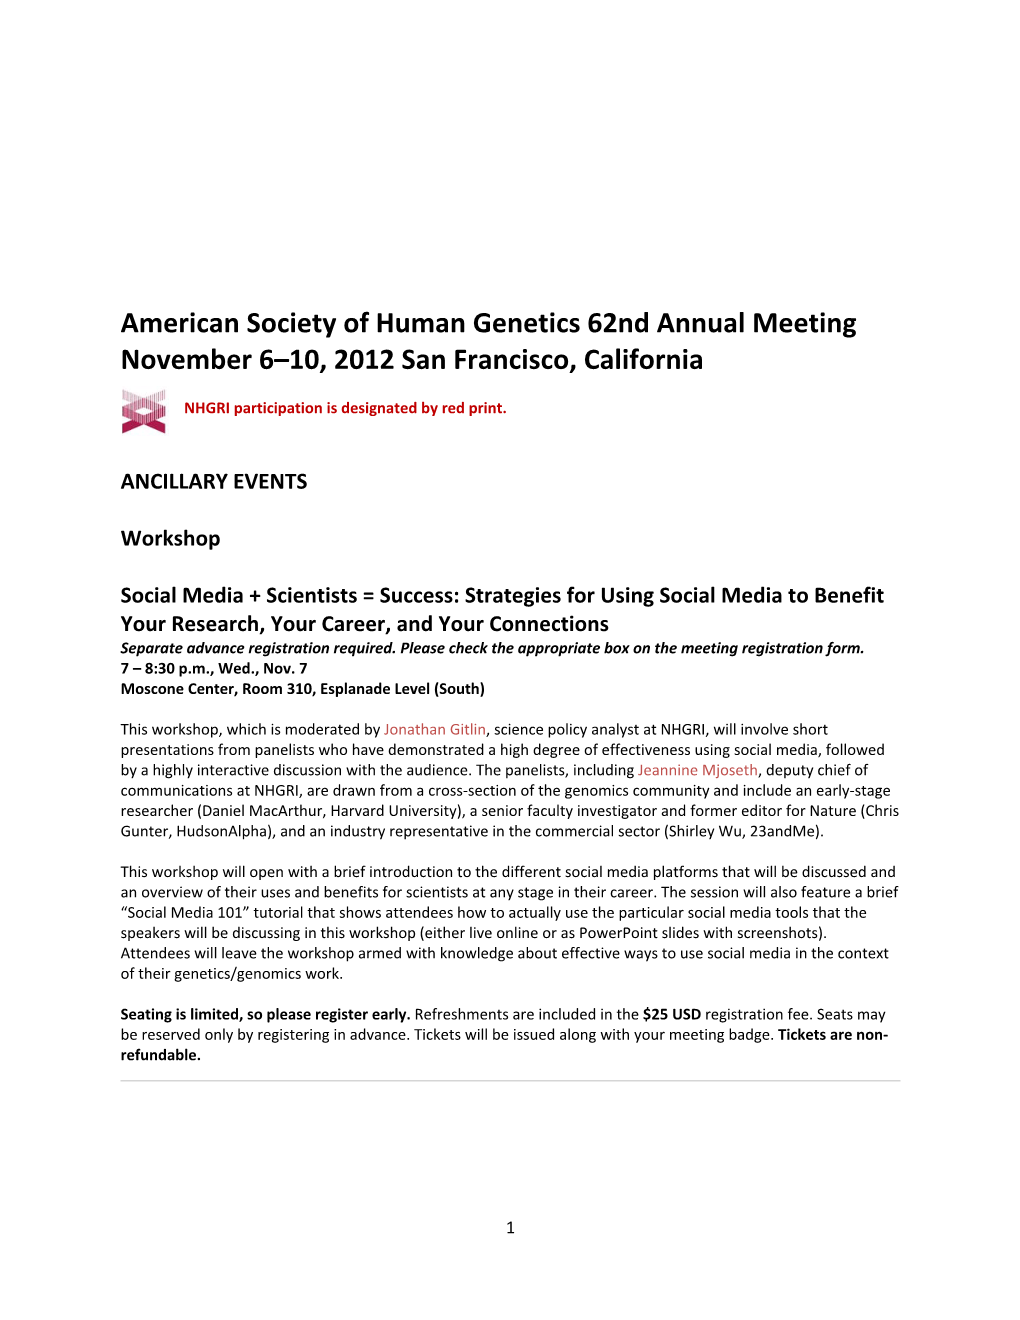 ASHG 62Nd Annual Meeting Schedule